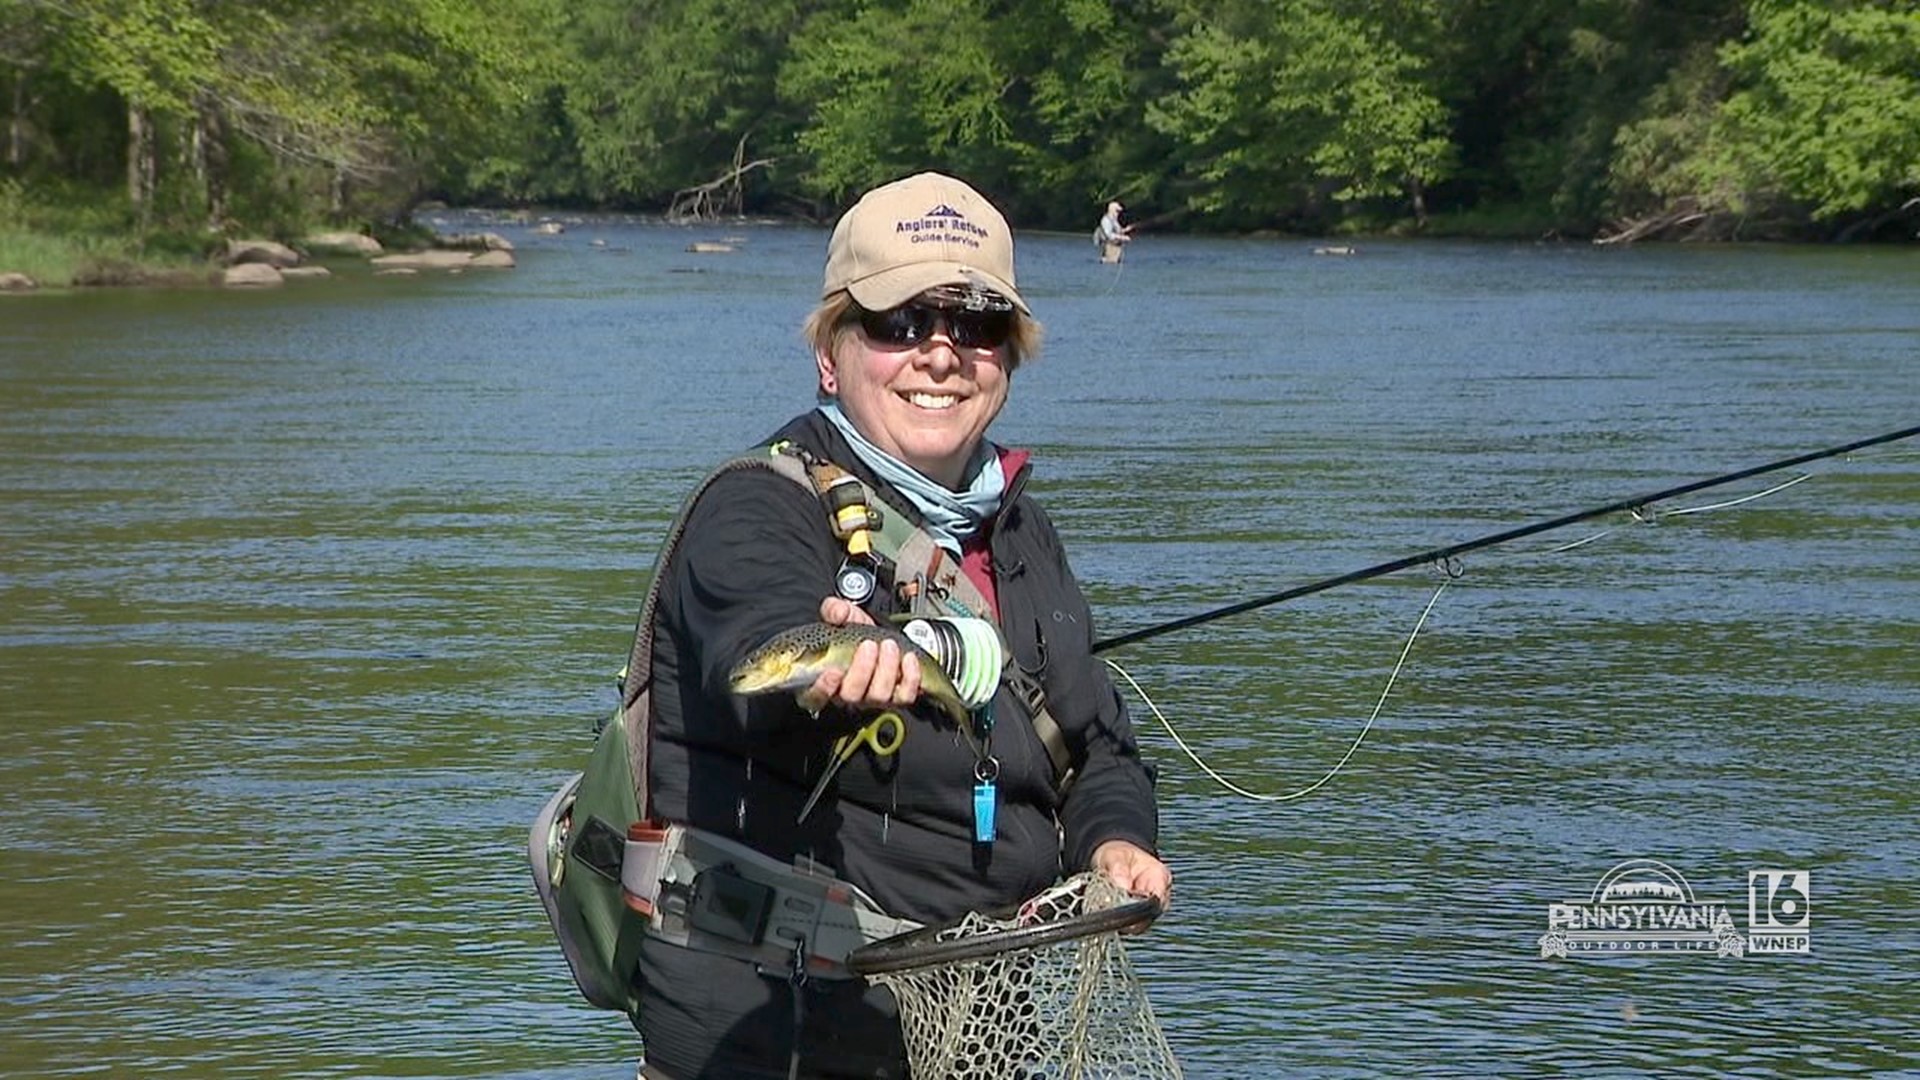 Dry fly fishing with an accomplished female guide.